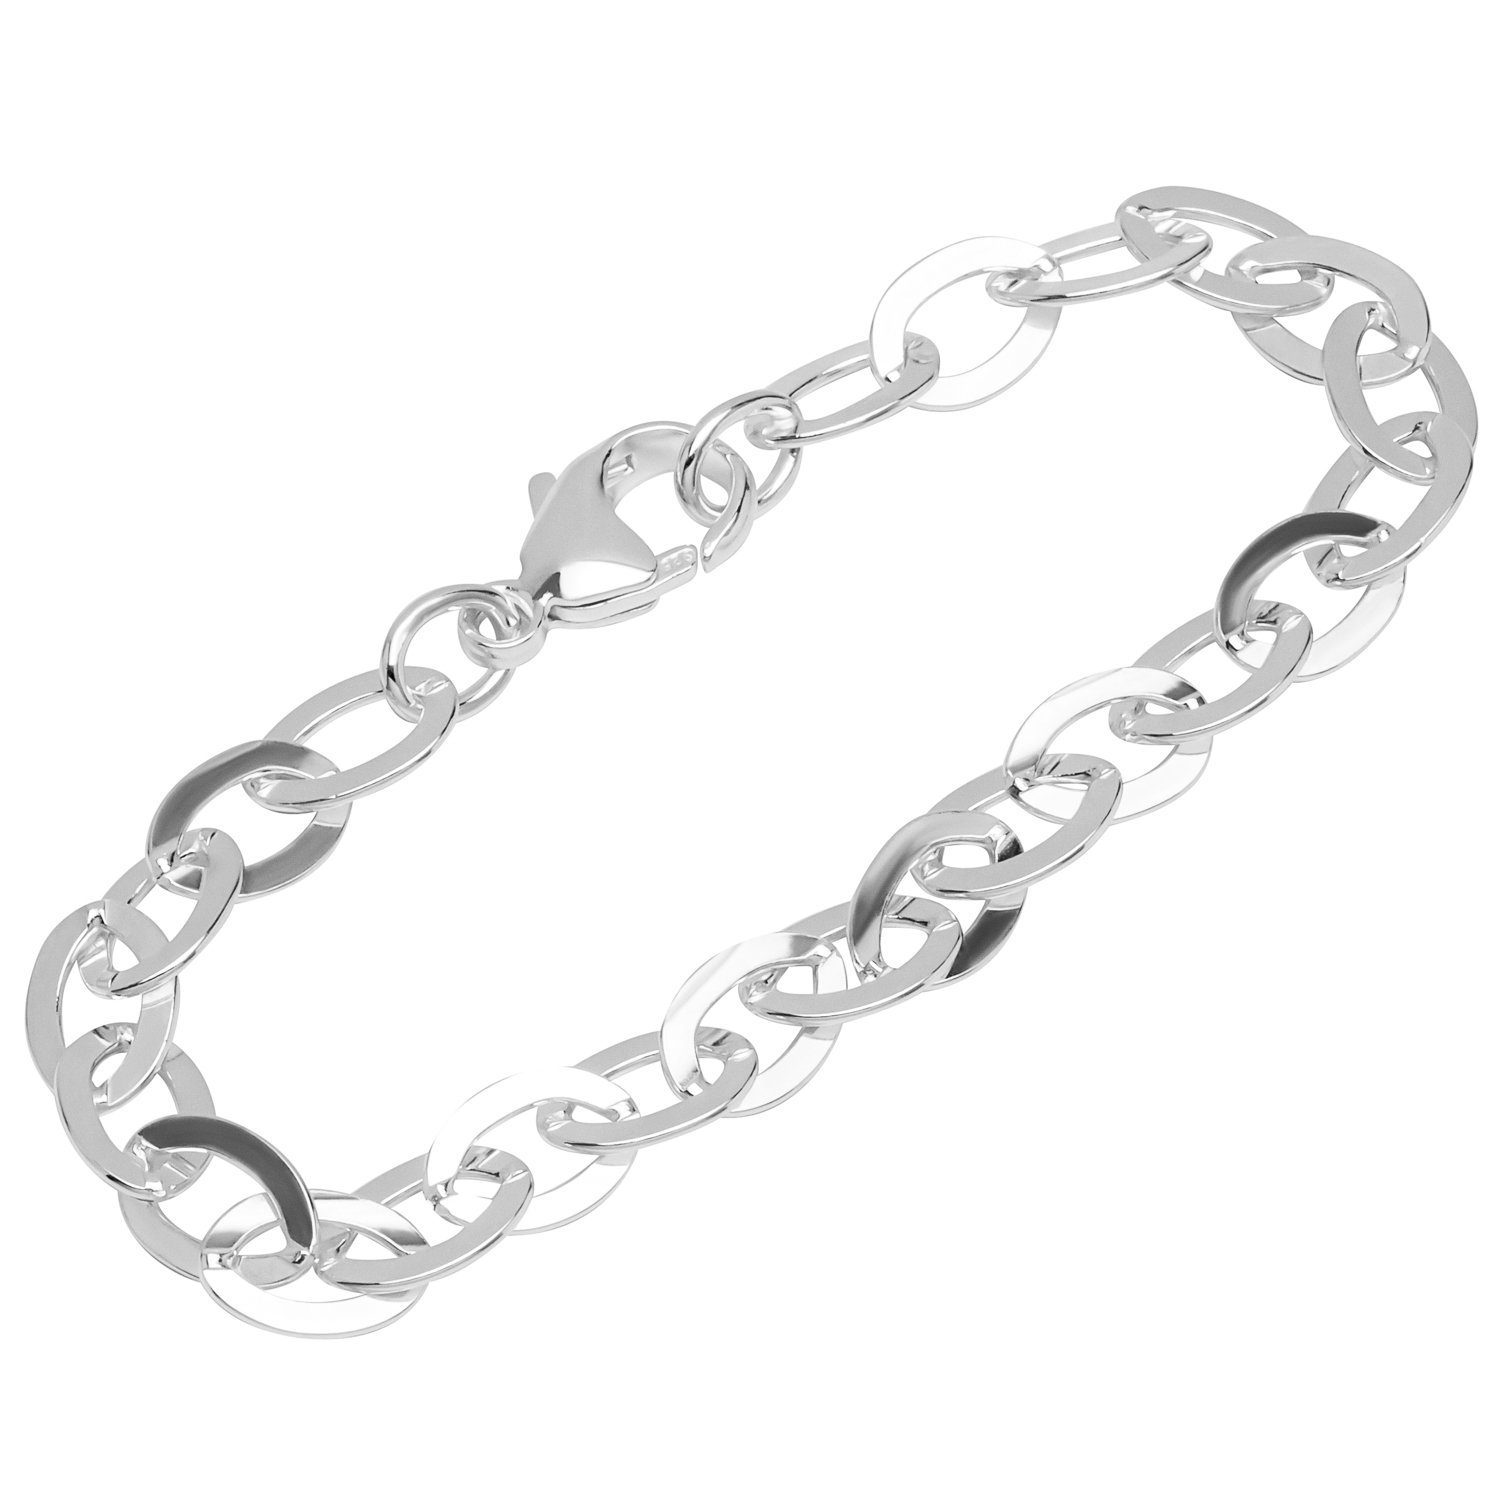 NKlaus Silberarmband Armband 925 Sterling Silber 20cm Weit Ankerkette f (1 Stück), Made in Germany